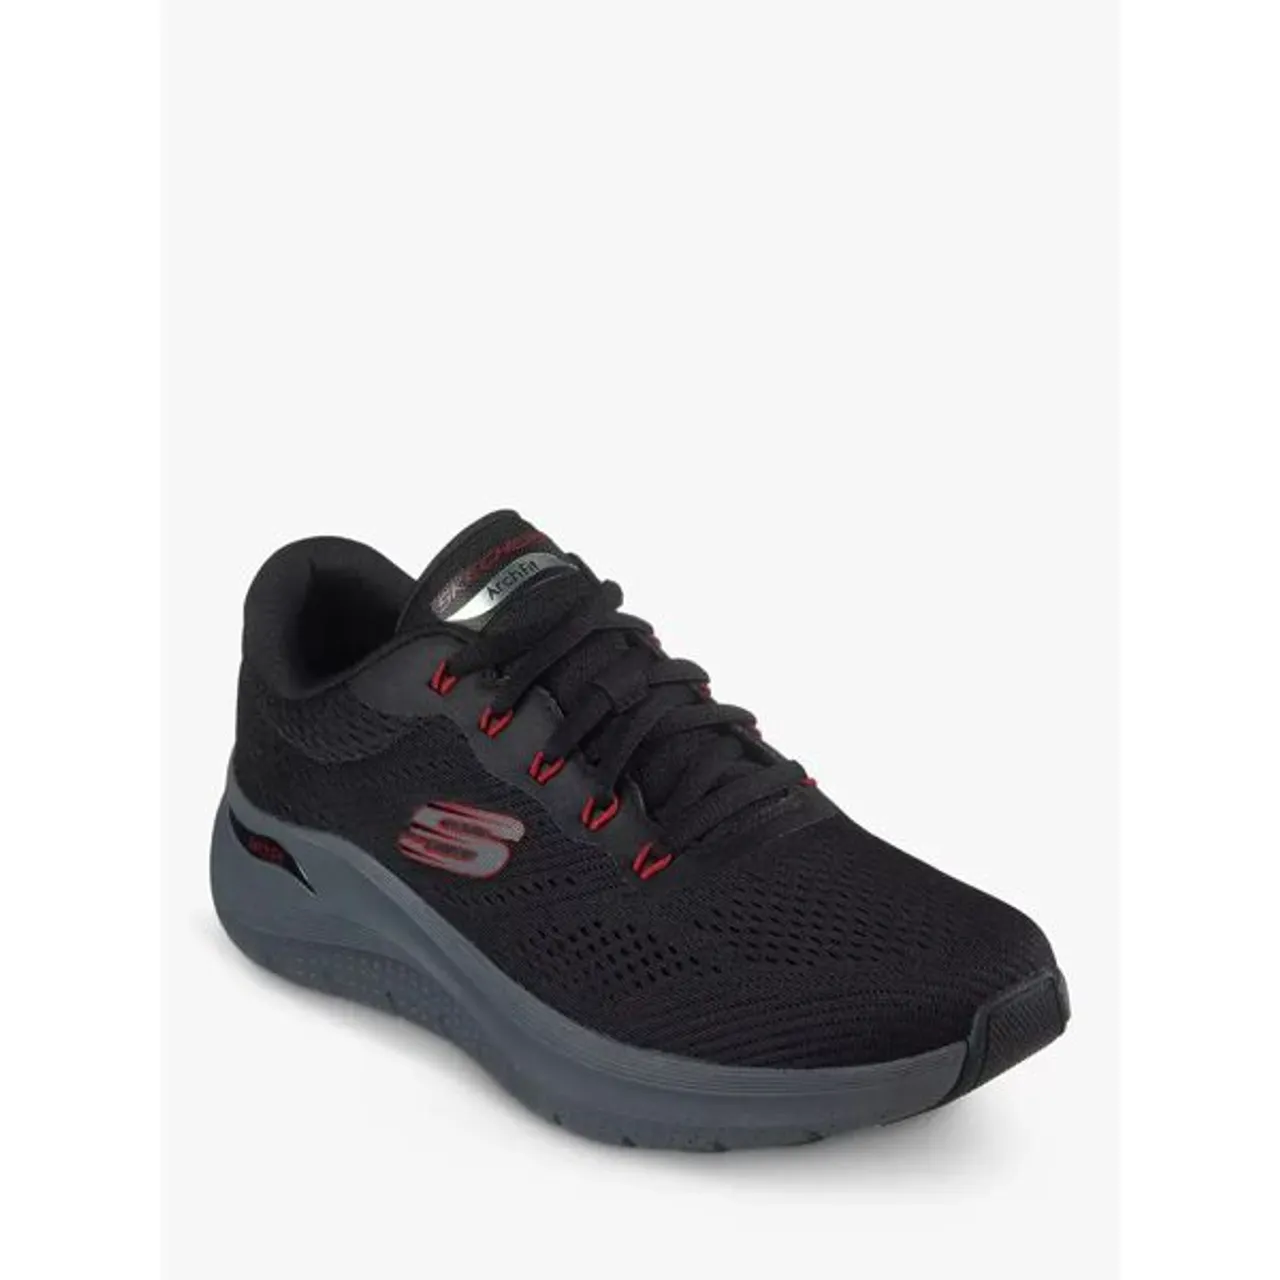 Skechers Arch Fit 2.0 Trainers, Black/Red - Black/Red - Male